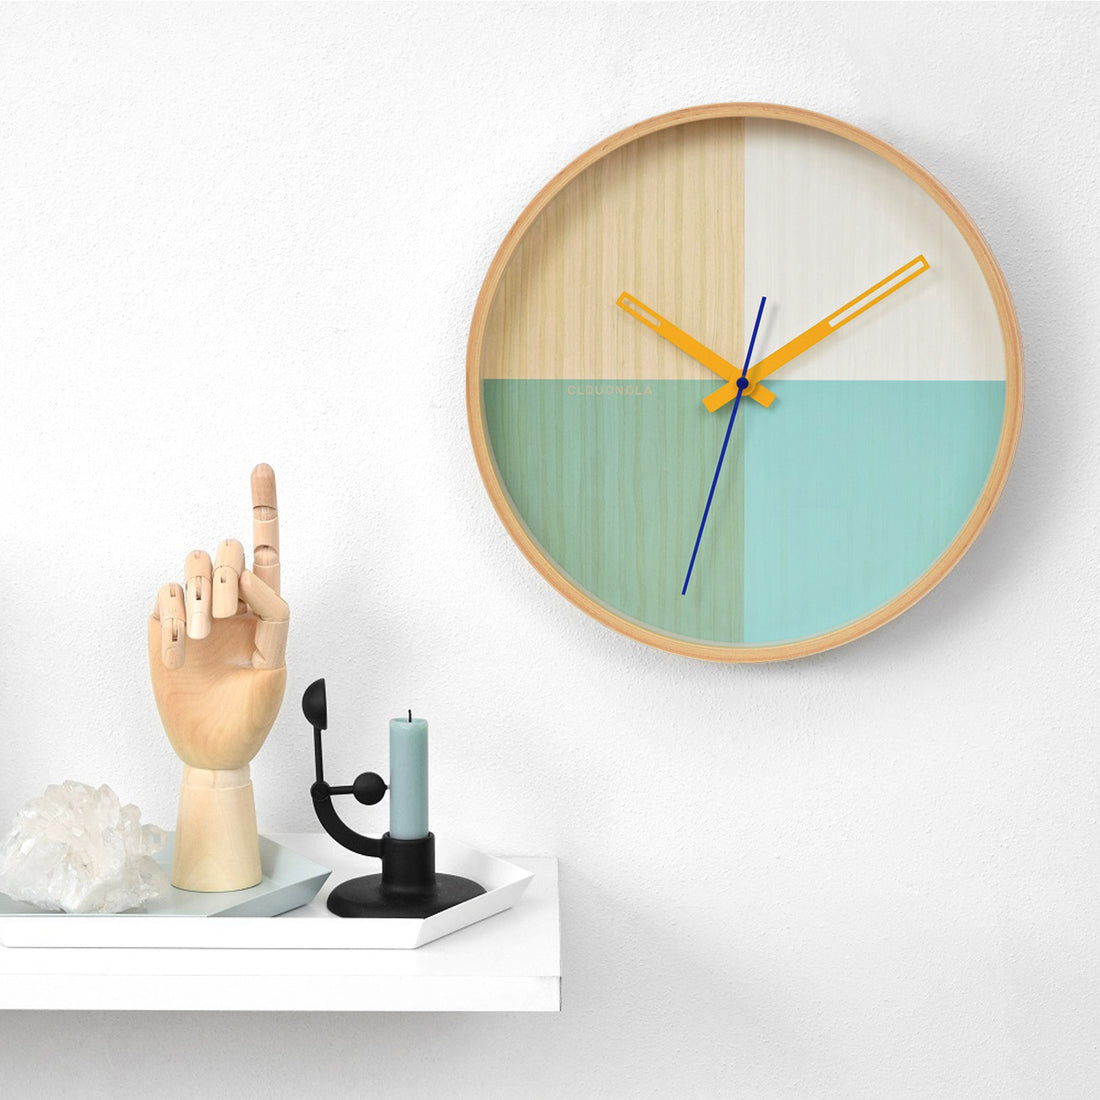 Colorful Timekeeping: Exploring the Relationship Between Colors and Clocks